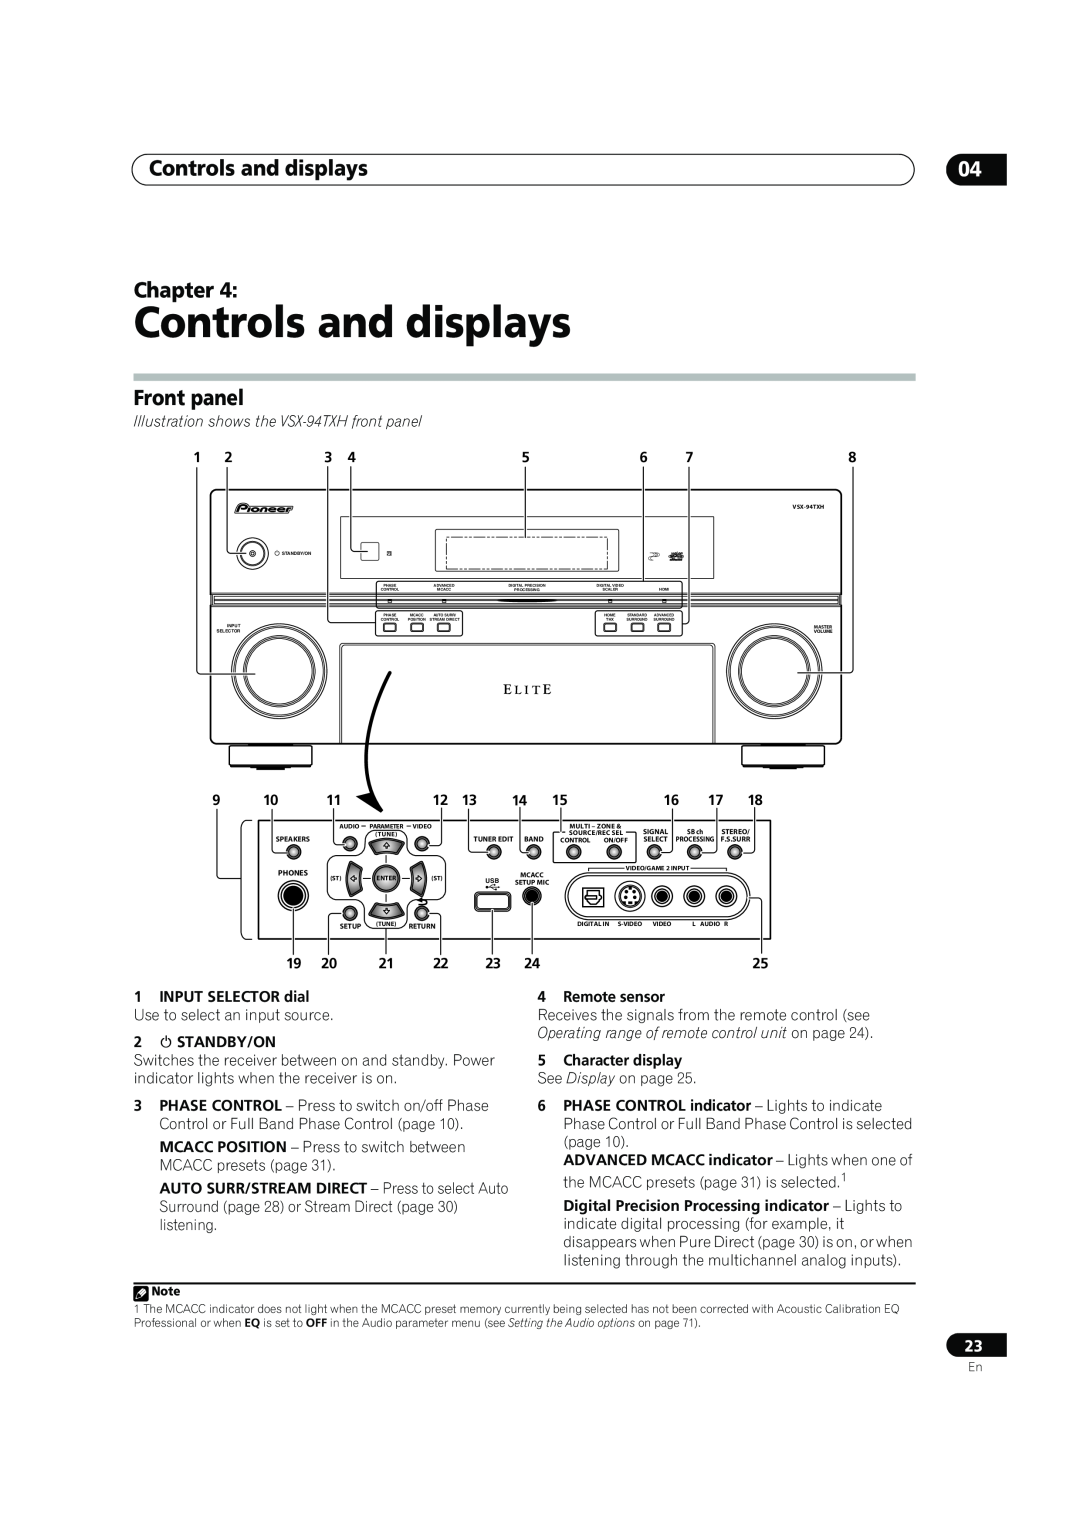 DreamGEAR VSX-92TXH Controls and displays, Chapter, Front panel, Illustration shows the VSX-94TXH front panel 